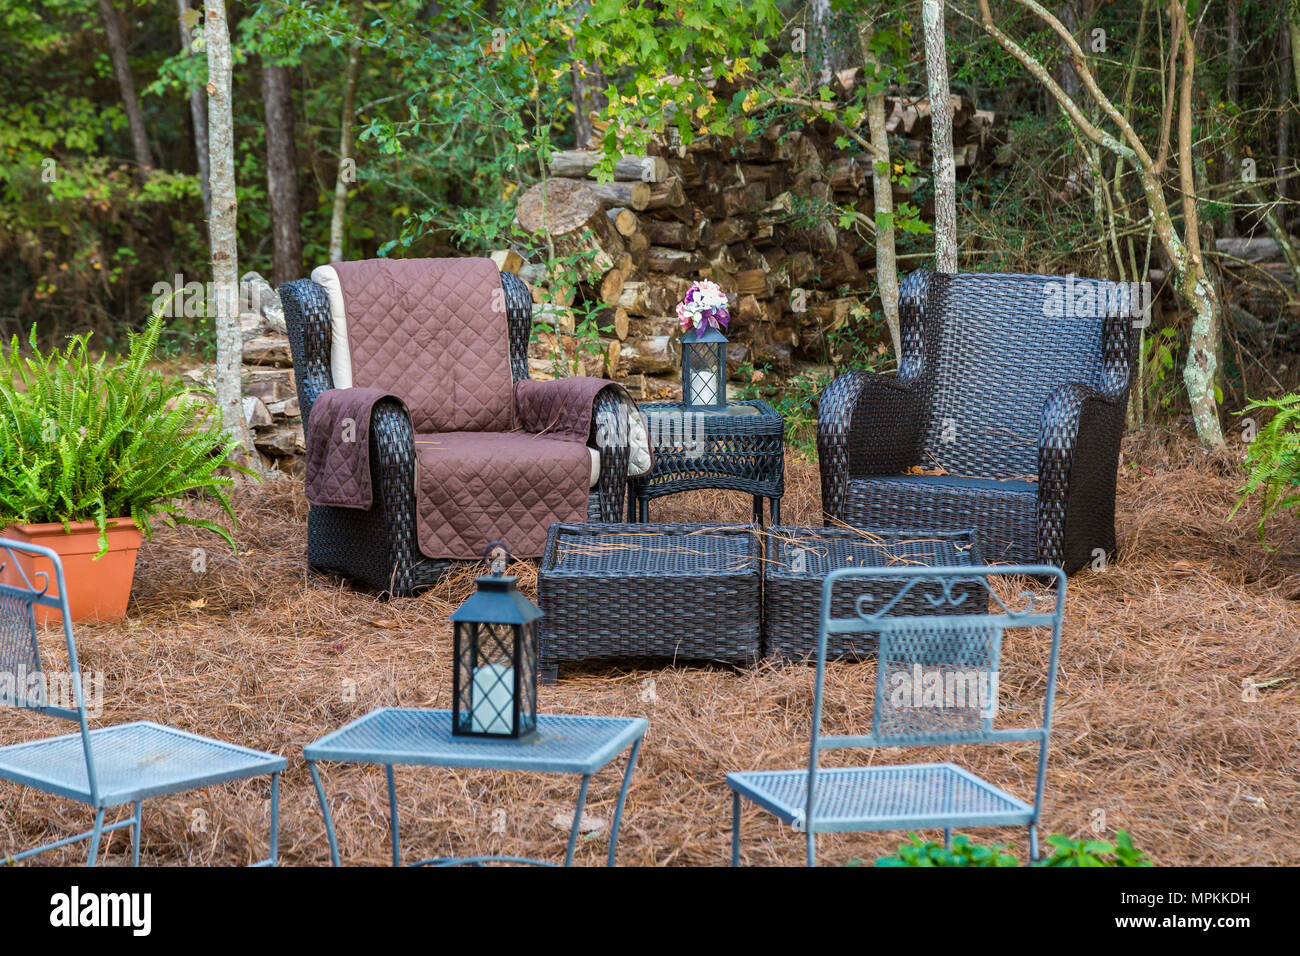 Outdoor seating at the edge of a wooded area Stock Photo